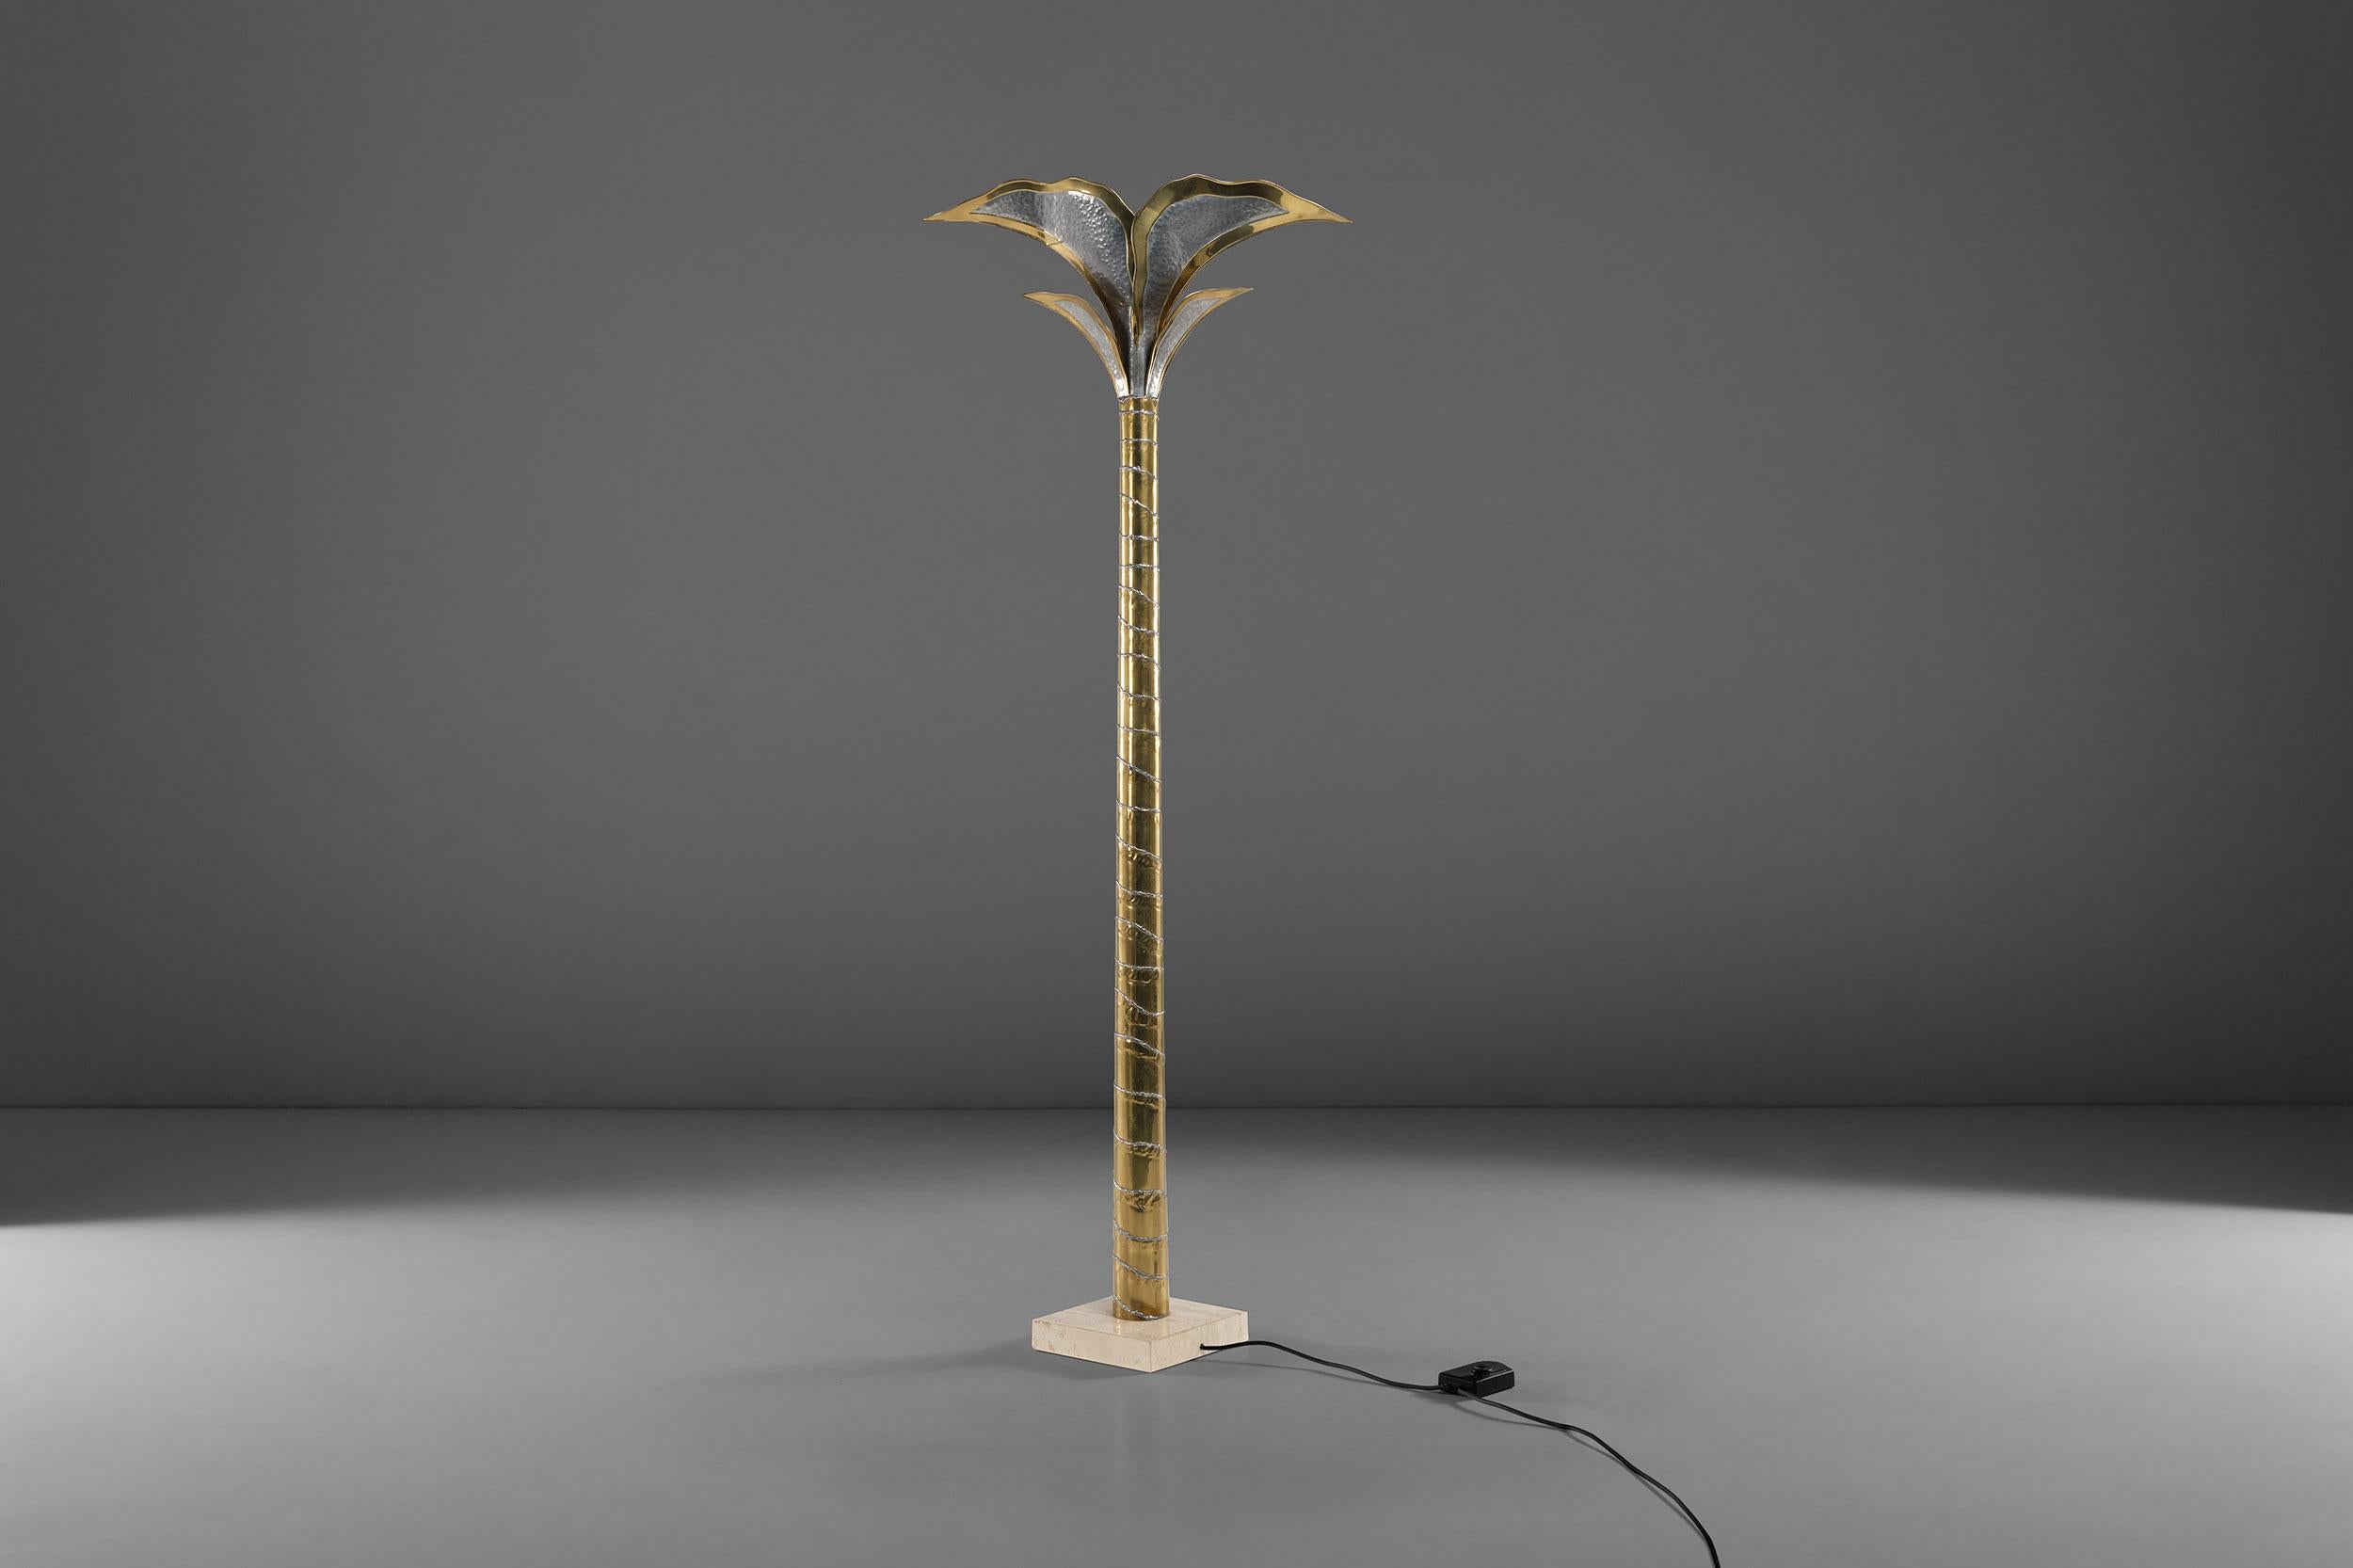 This beautiful floor lamp in the shape of a palm tree by Maison Jansen in pure 70s style will add a touch of creativity to your interiors. The golden and silver coloured brass leafs and trunk of the palm reflect a warm atmospherical light into the